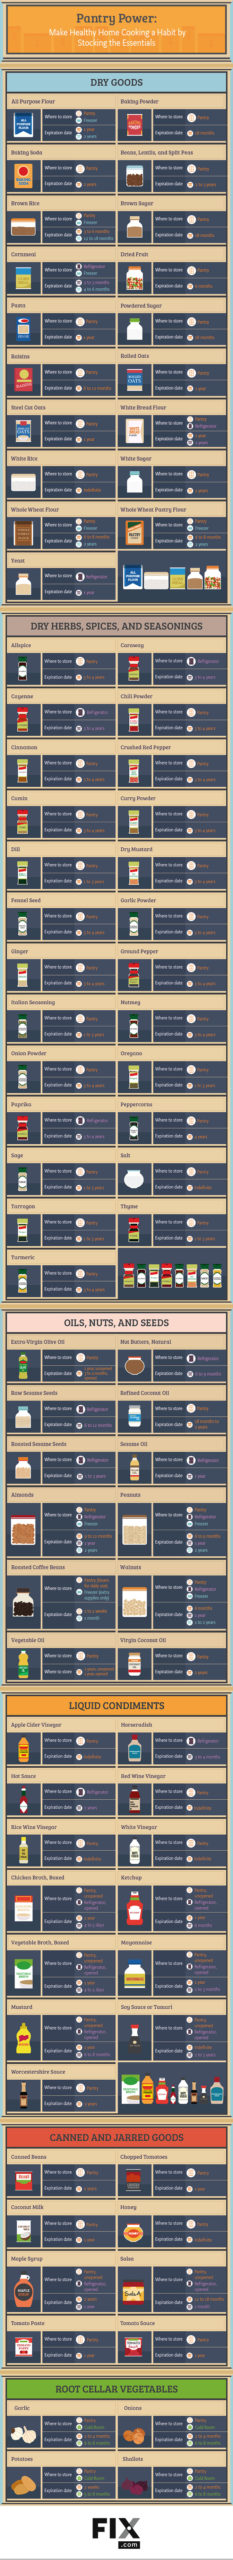 This Graphic Shows How To Keep Your Pantry Well Stocked (And When To Toss Things Out) [Infographic]